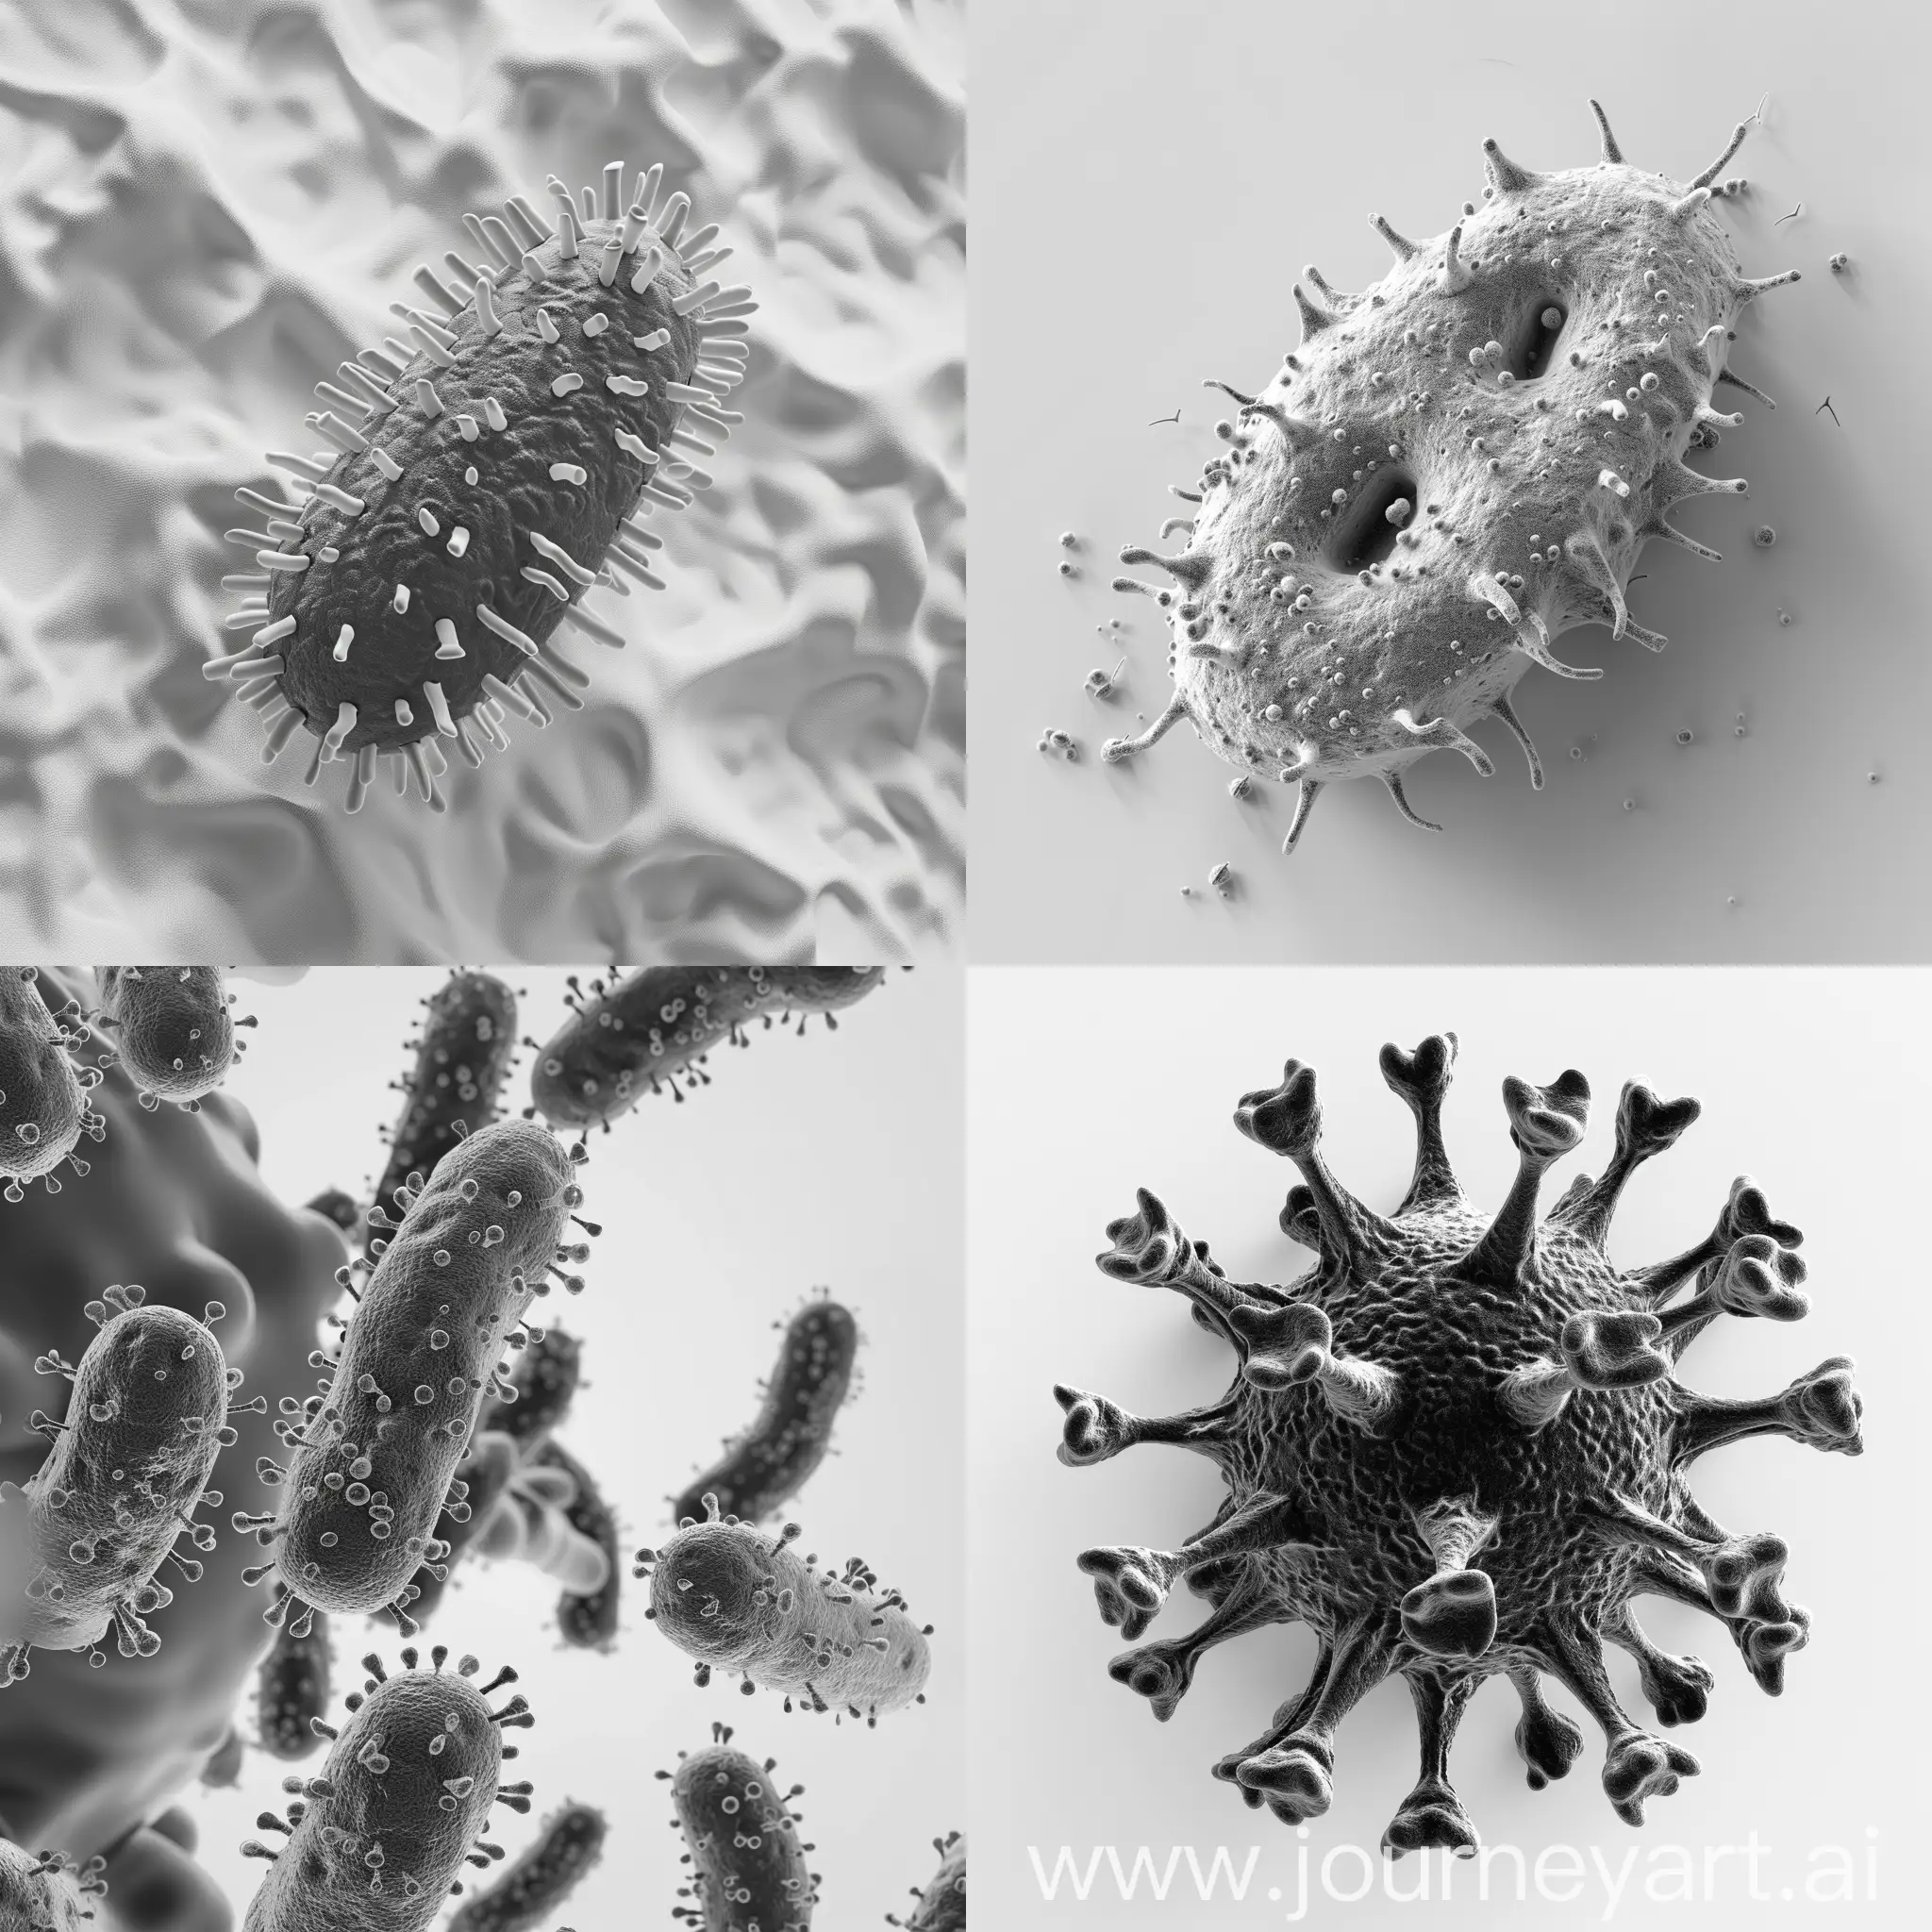 one microbe 3d, black and white photo, white uniform background, isolated